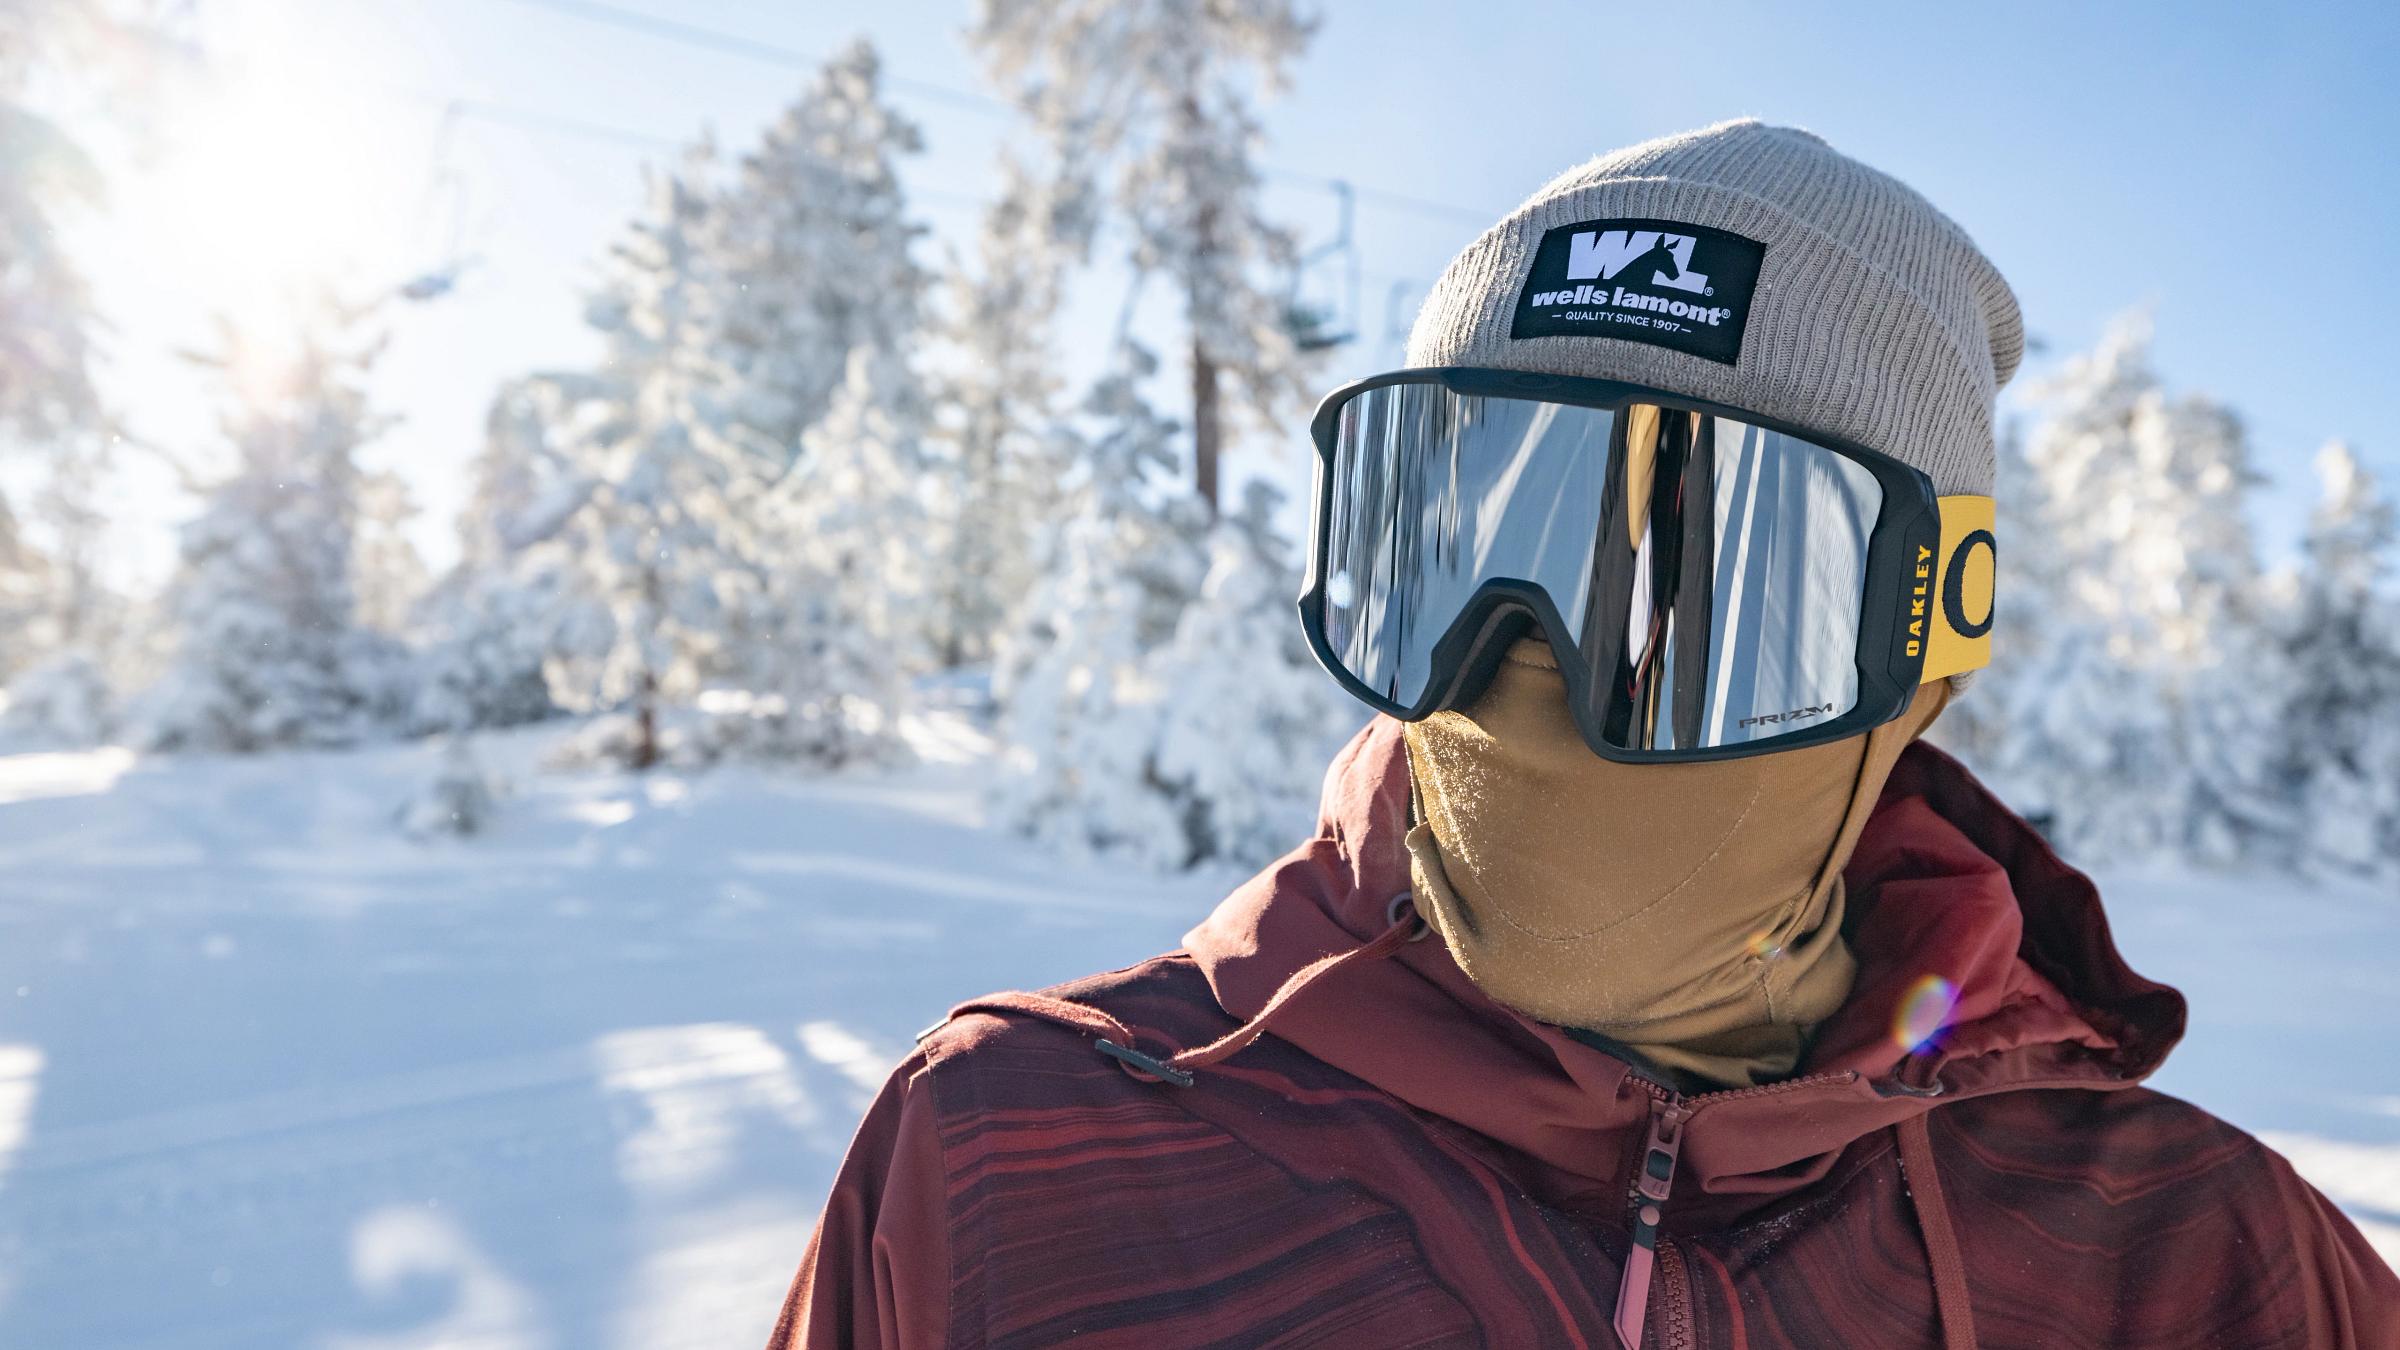 Snowboarder close up in snow goggles